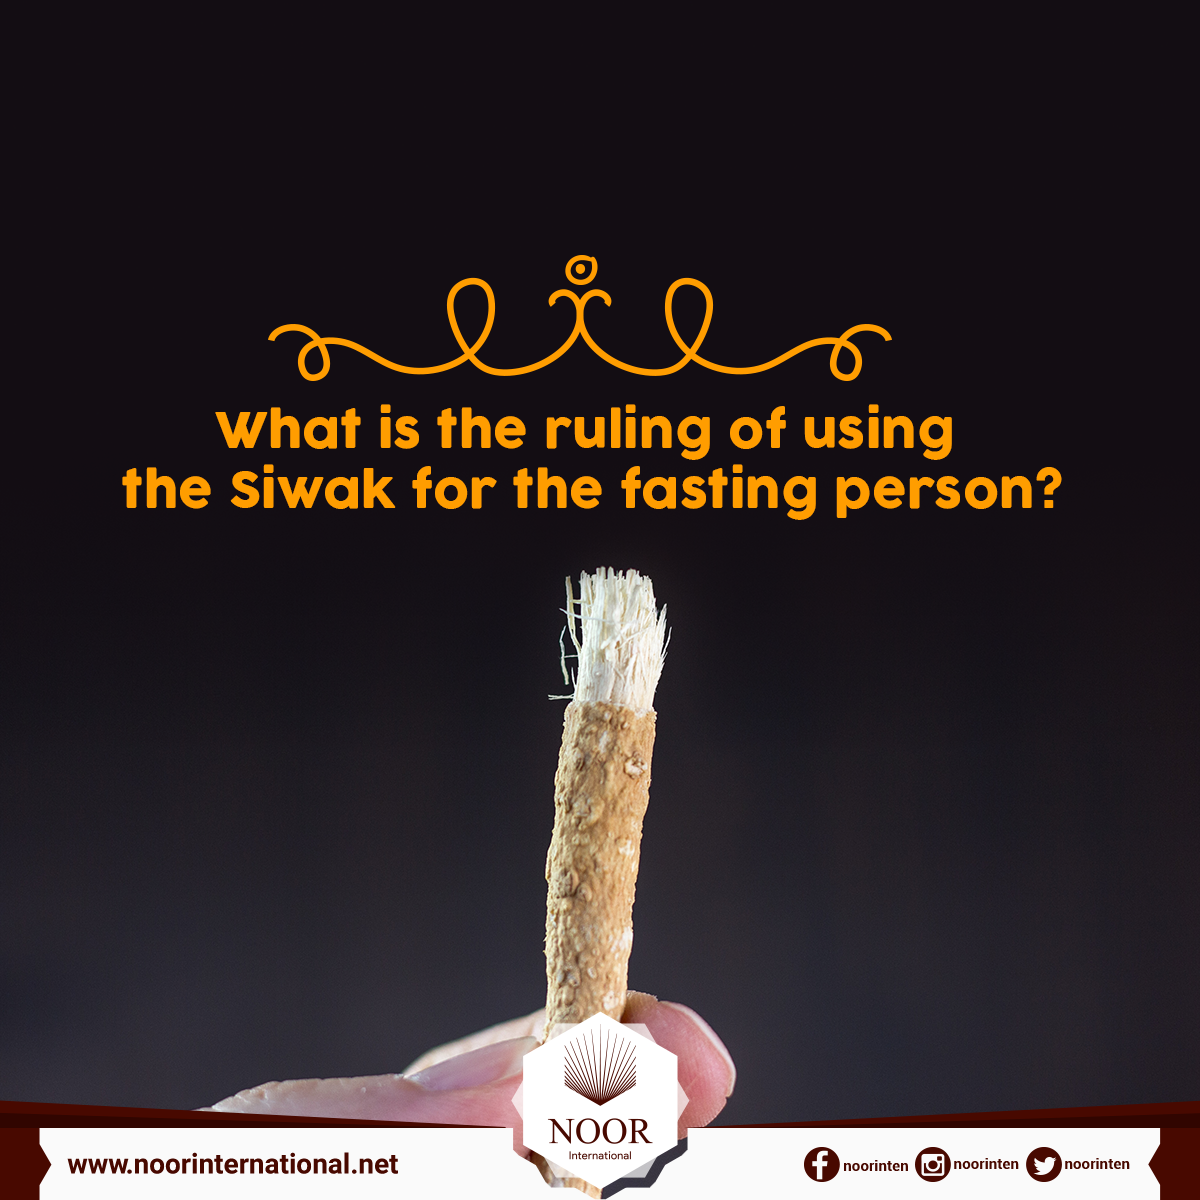 What is the ruling of using the Siwak for the fasting person?